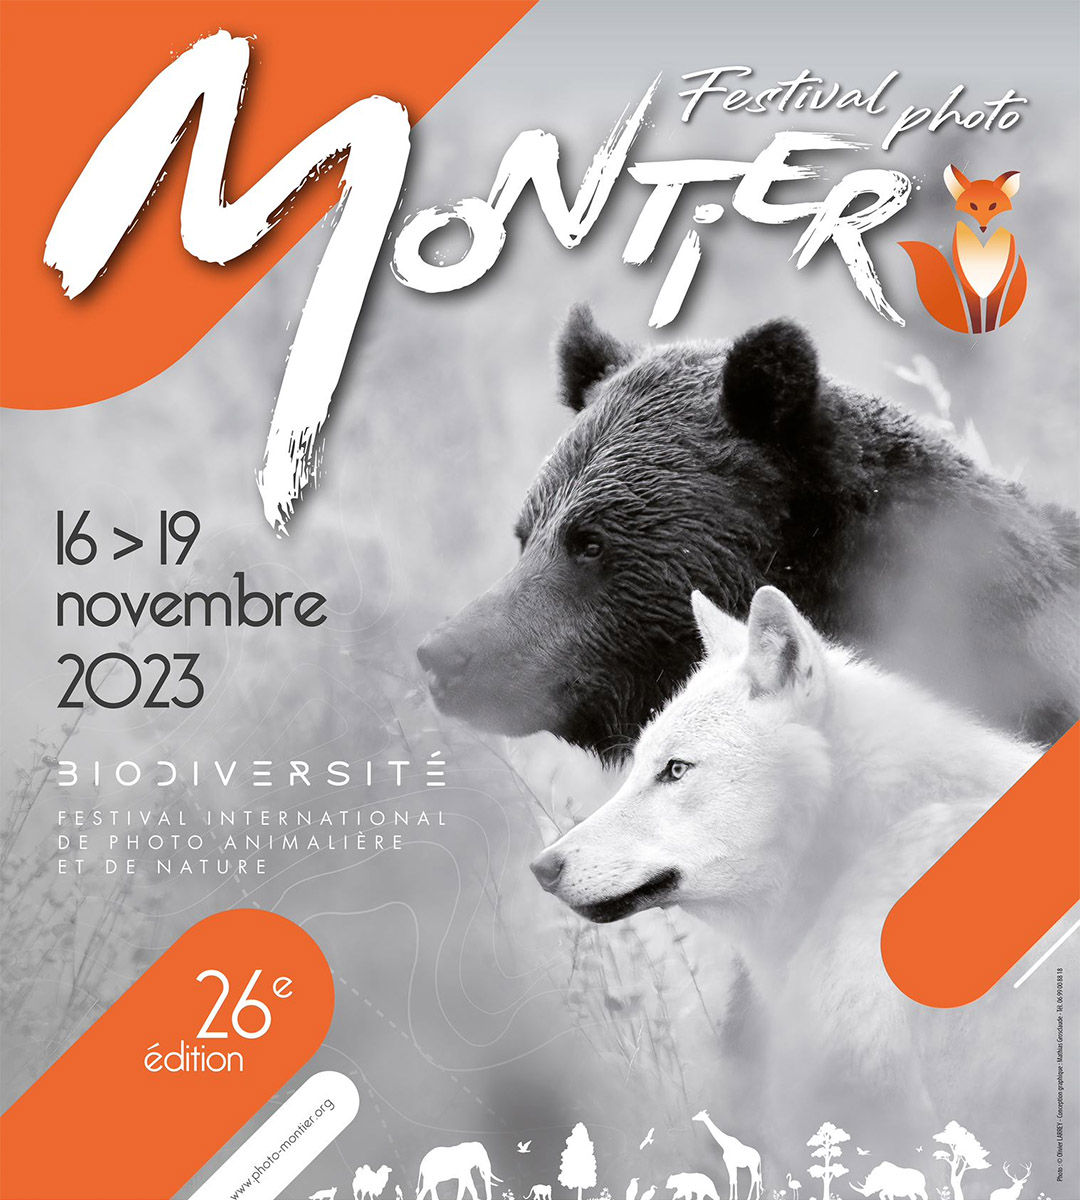 Montier, the must-see festival for photography lovers 2